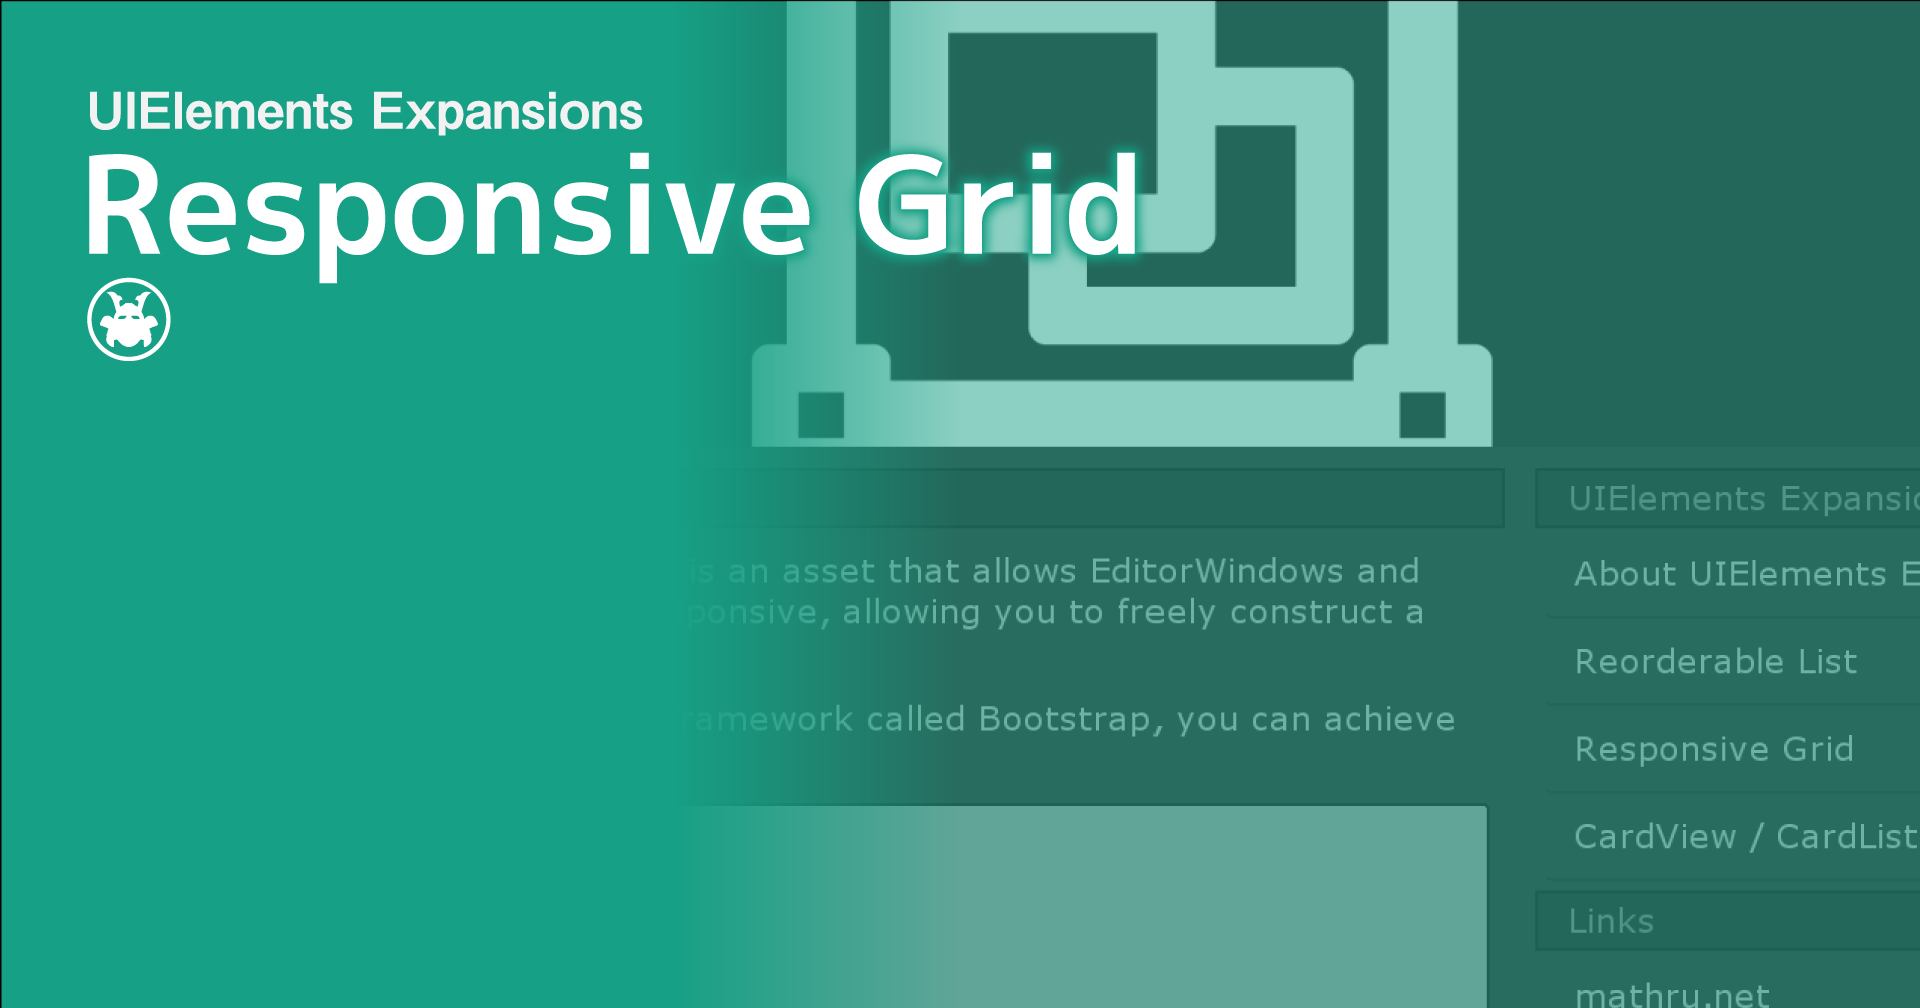 【Unity】UIElements Expansions: Responsive Grid